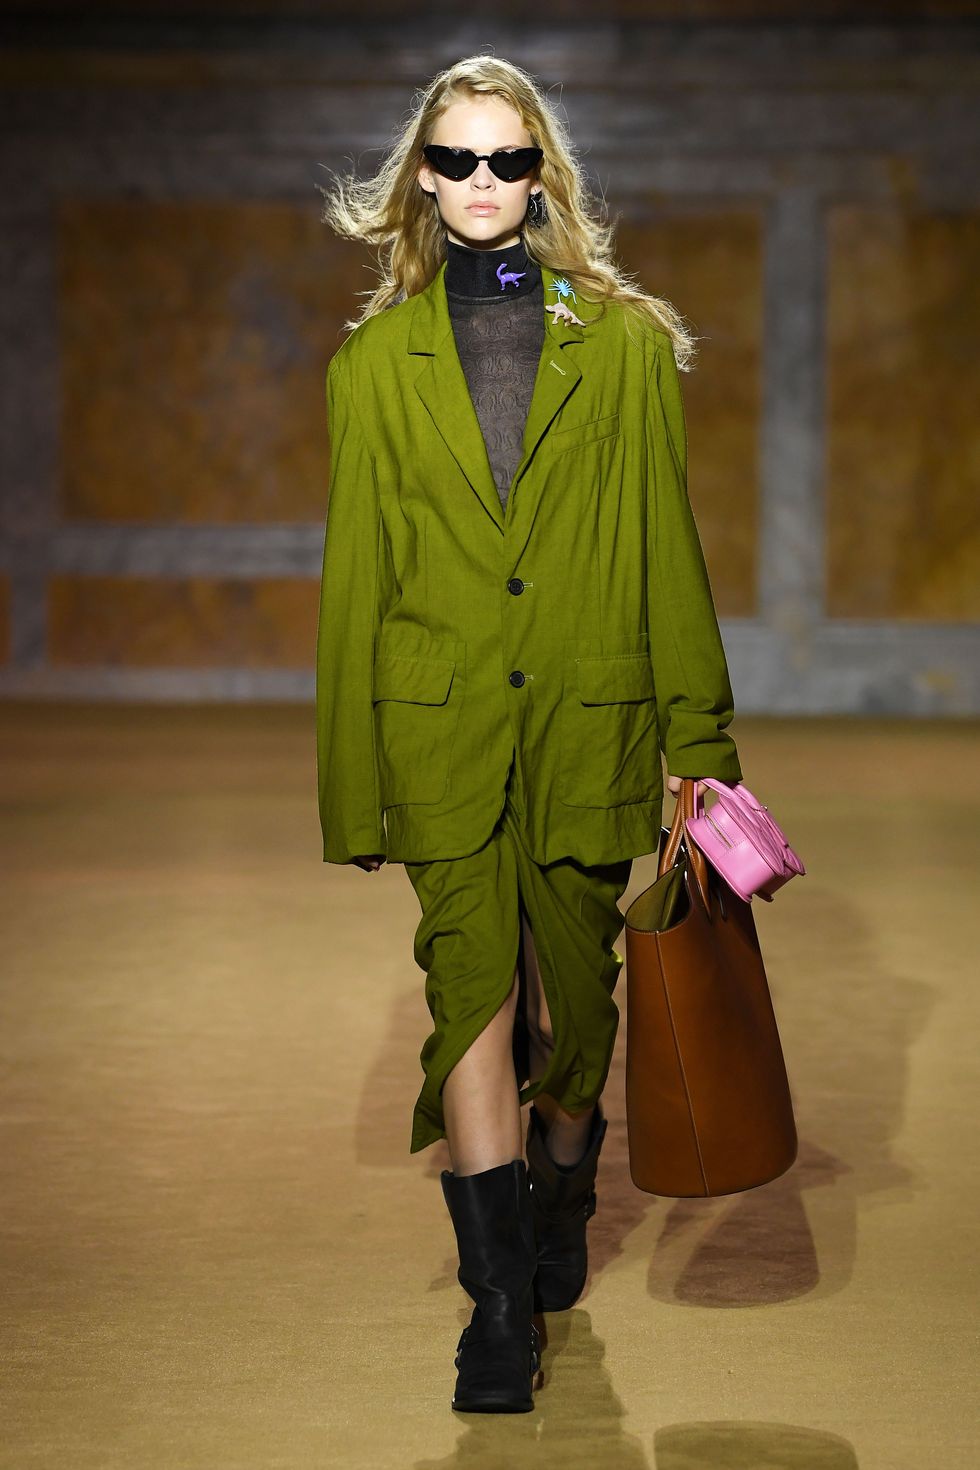 6 of the Biggest Bag Trends From the Spring 2023 Runways